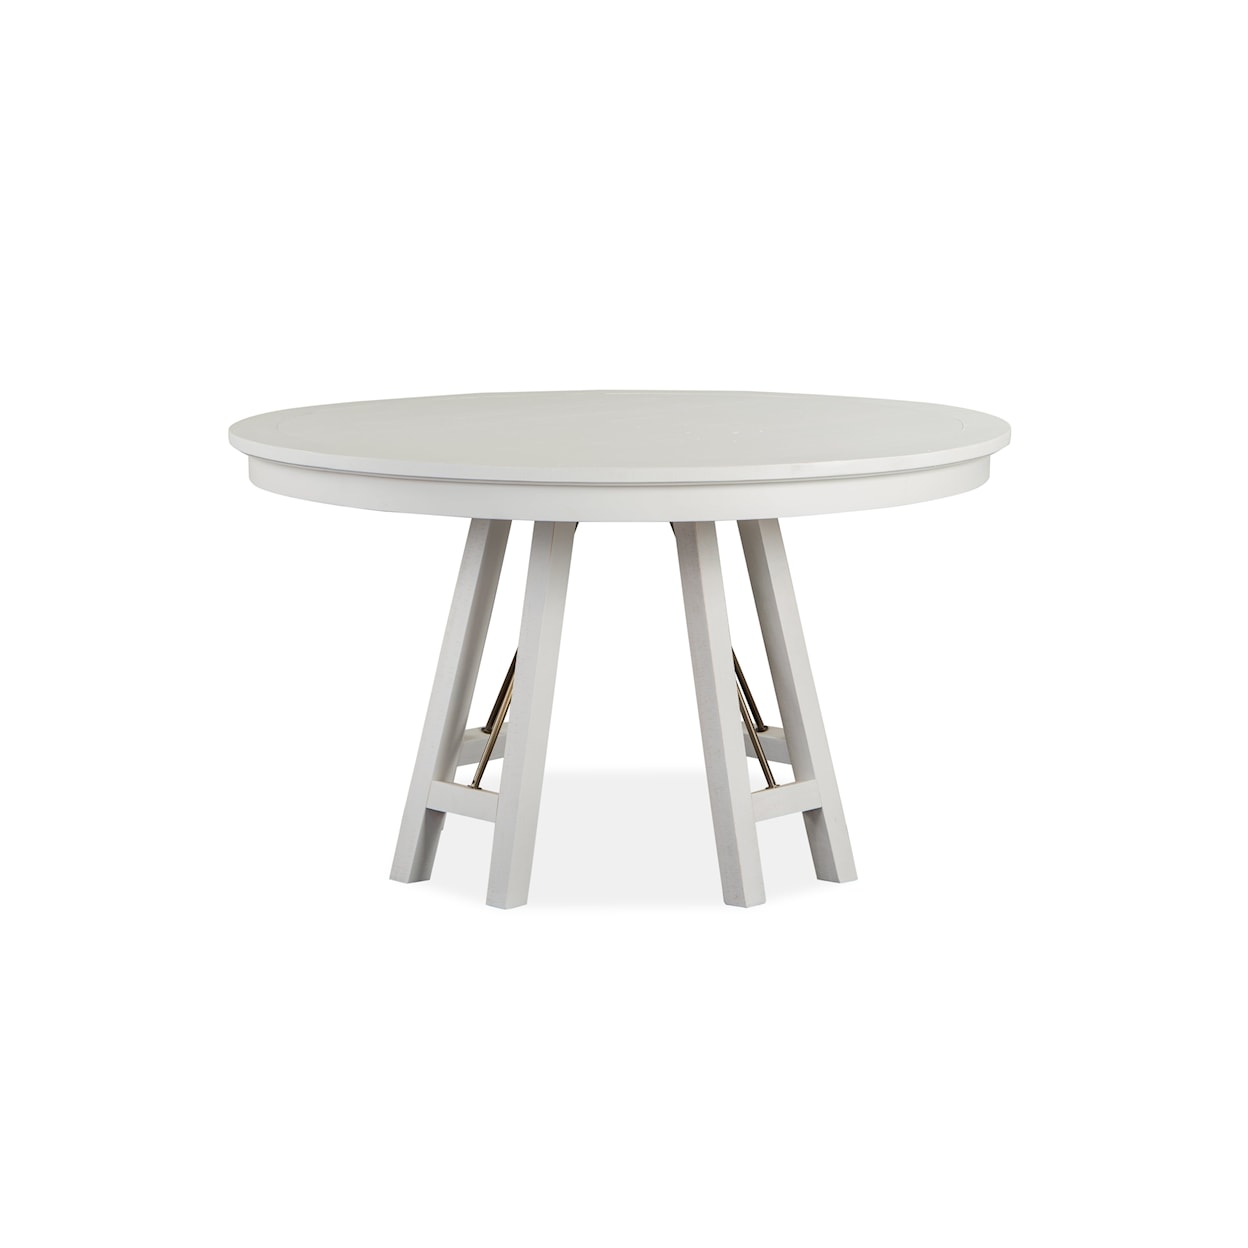 Magnussen Home Heron Cove Dining Round Dining Table